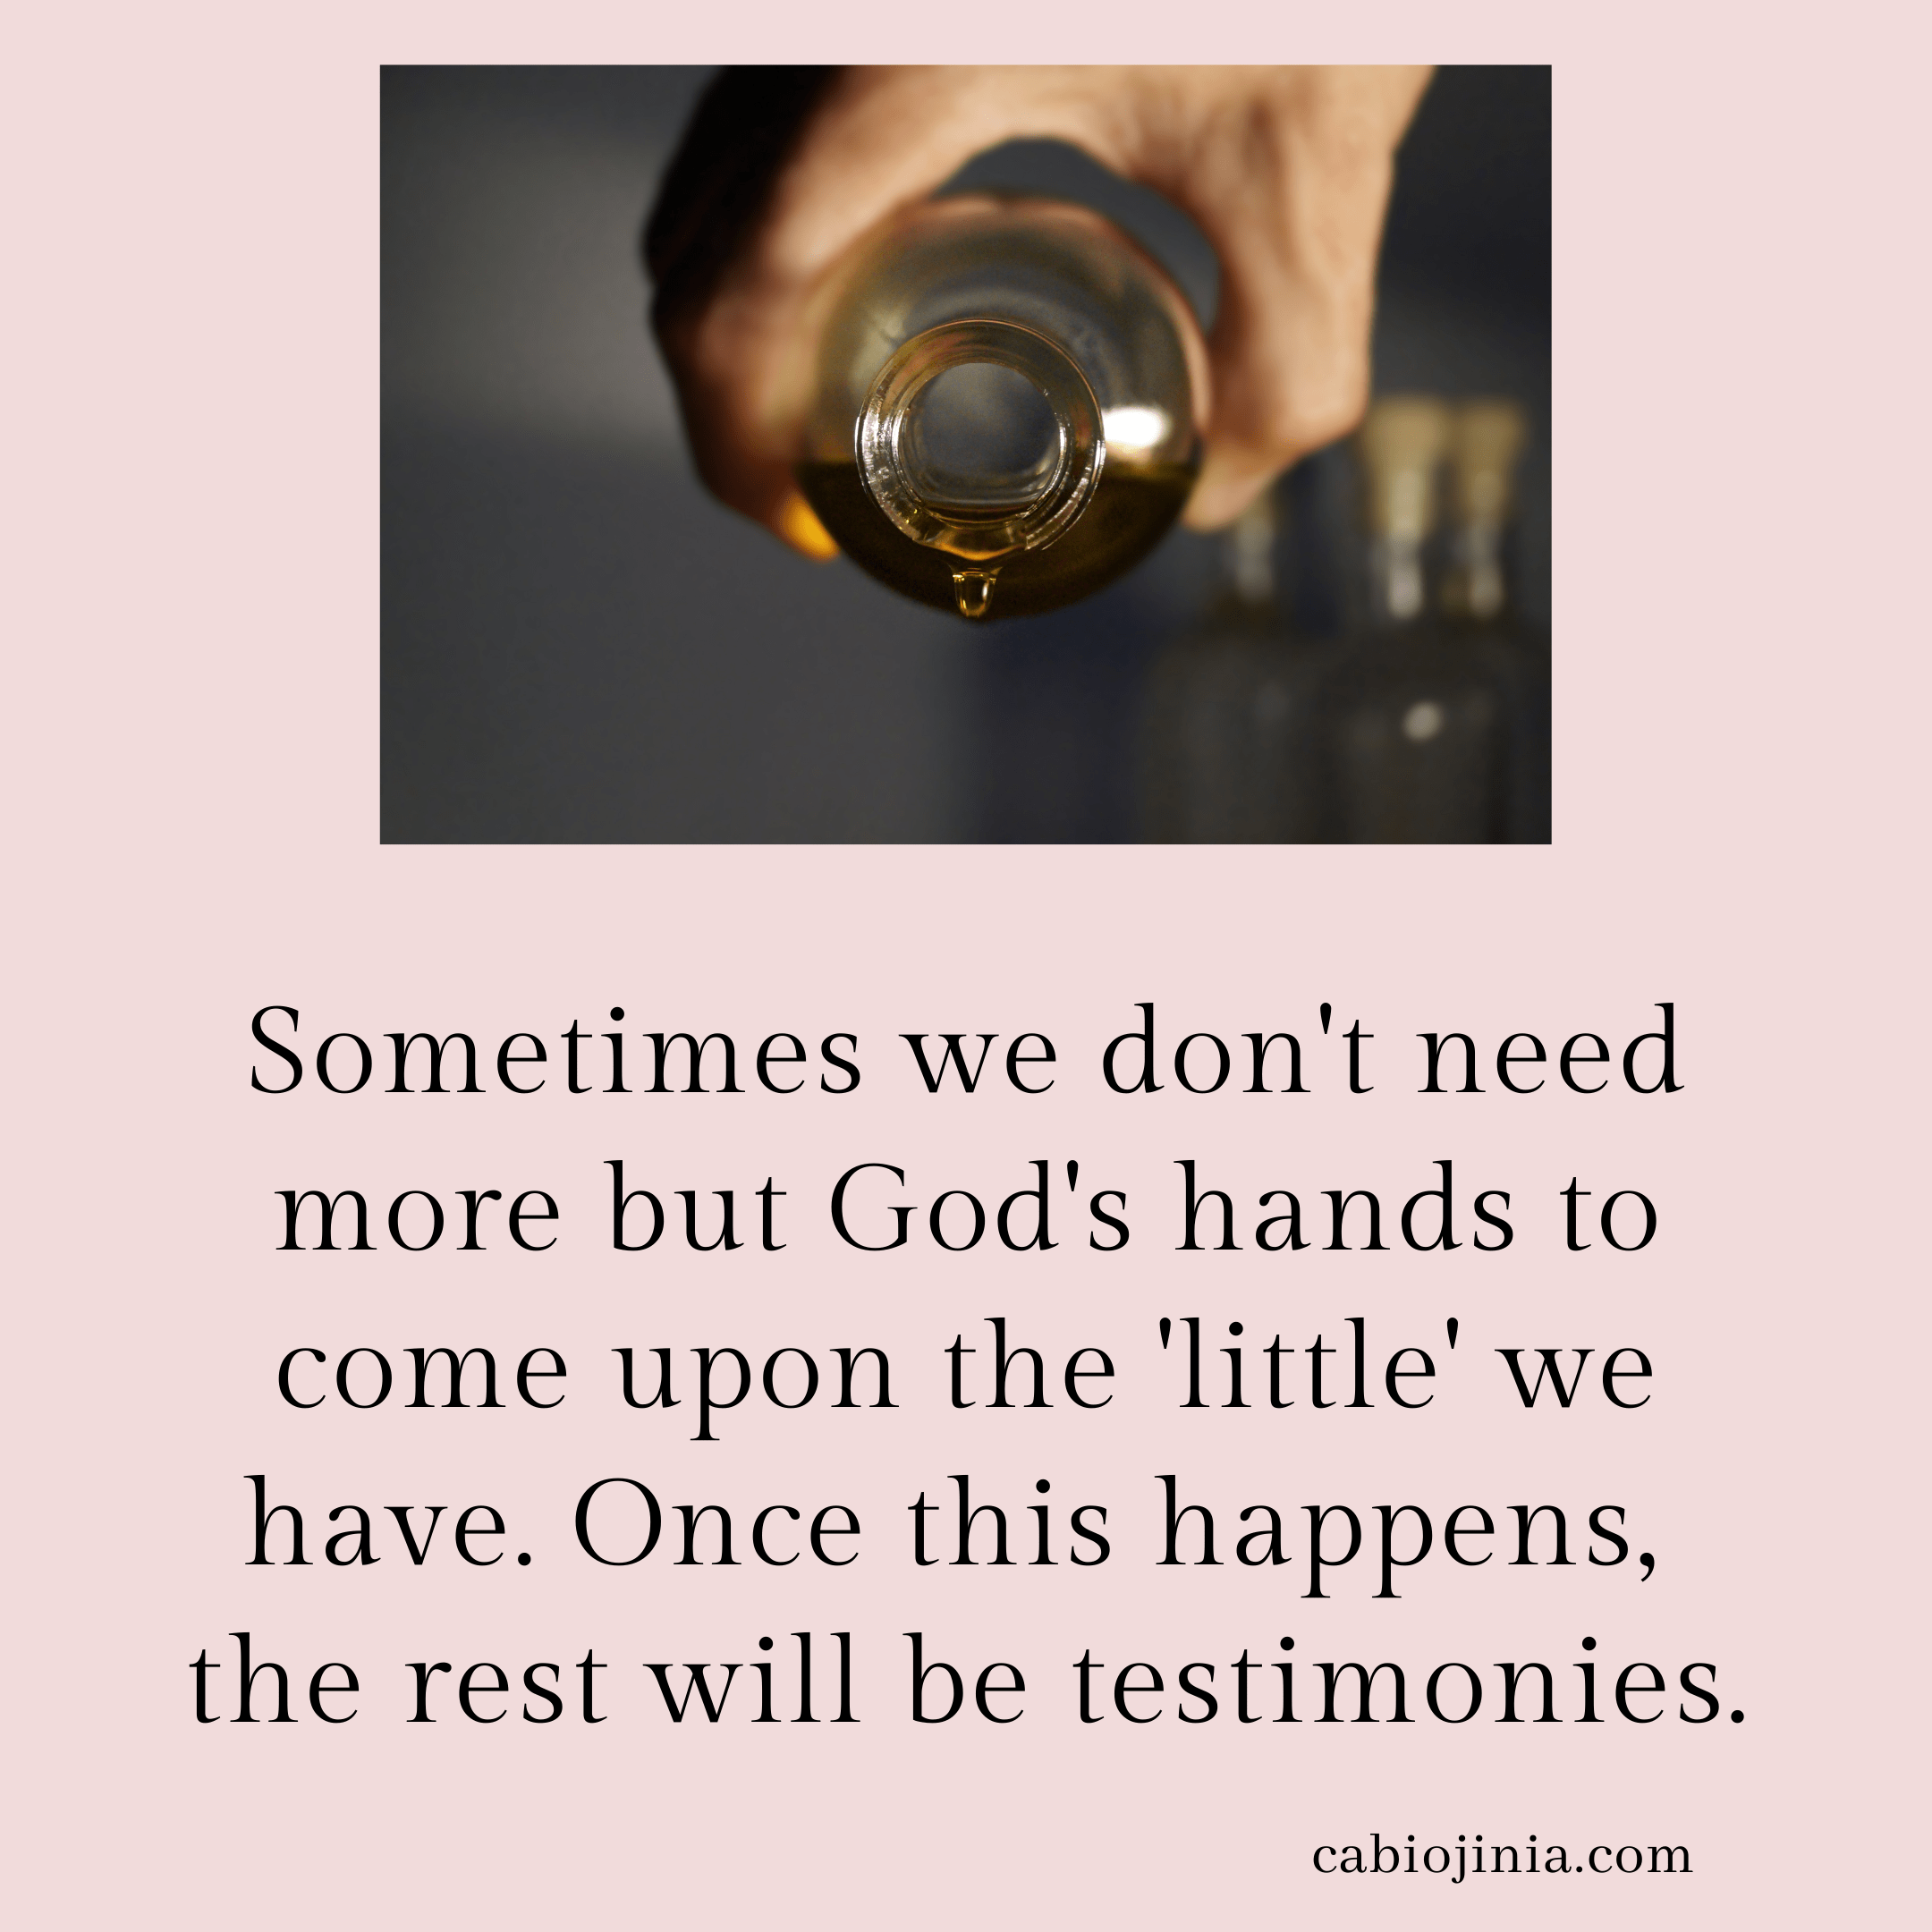 Sometimes we don't need more but God's hands to come upon the little we have. Cabiojinia